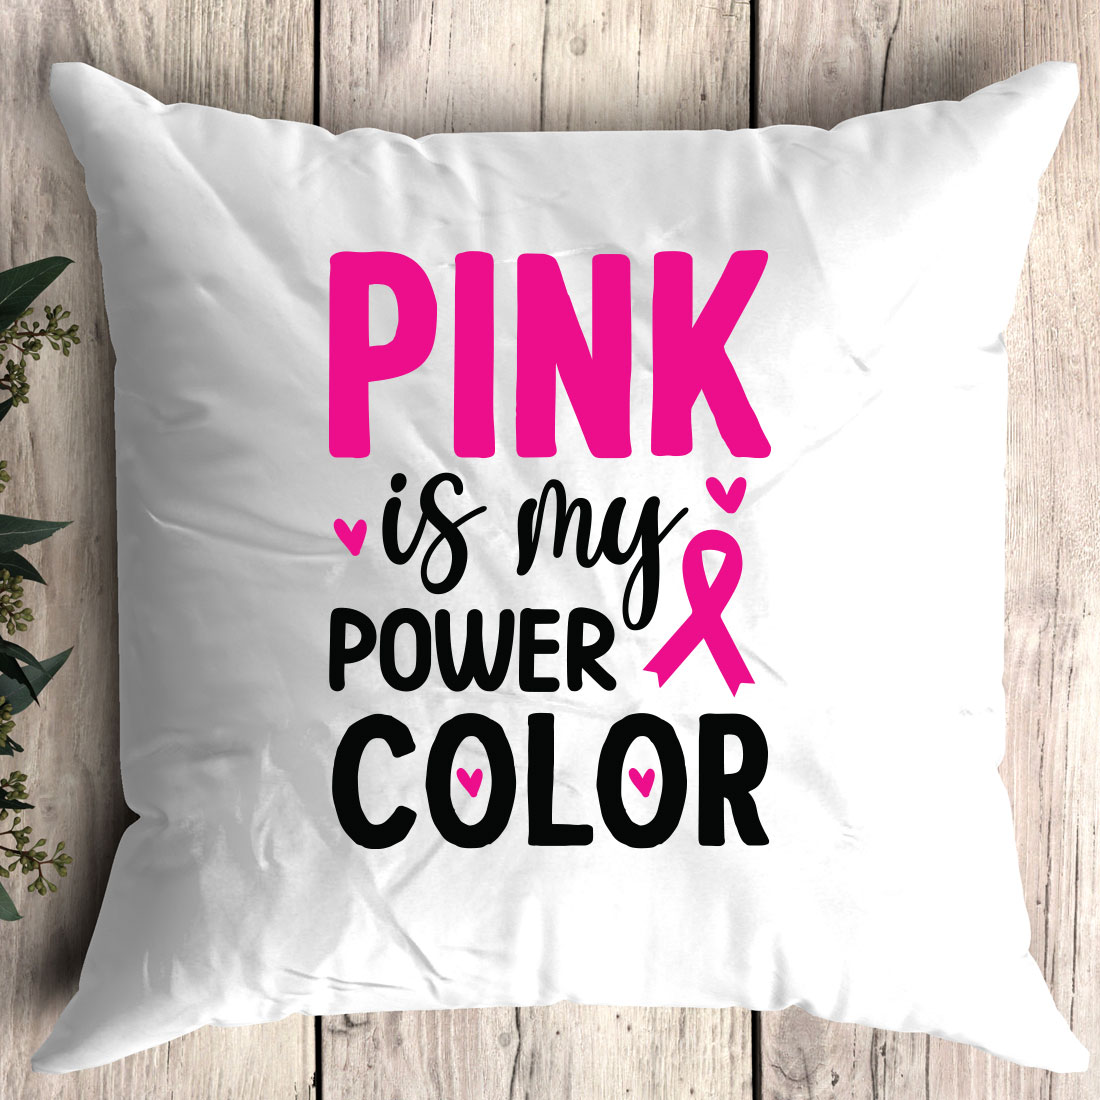 Pillow that says pink is my power color.